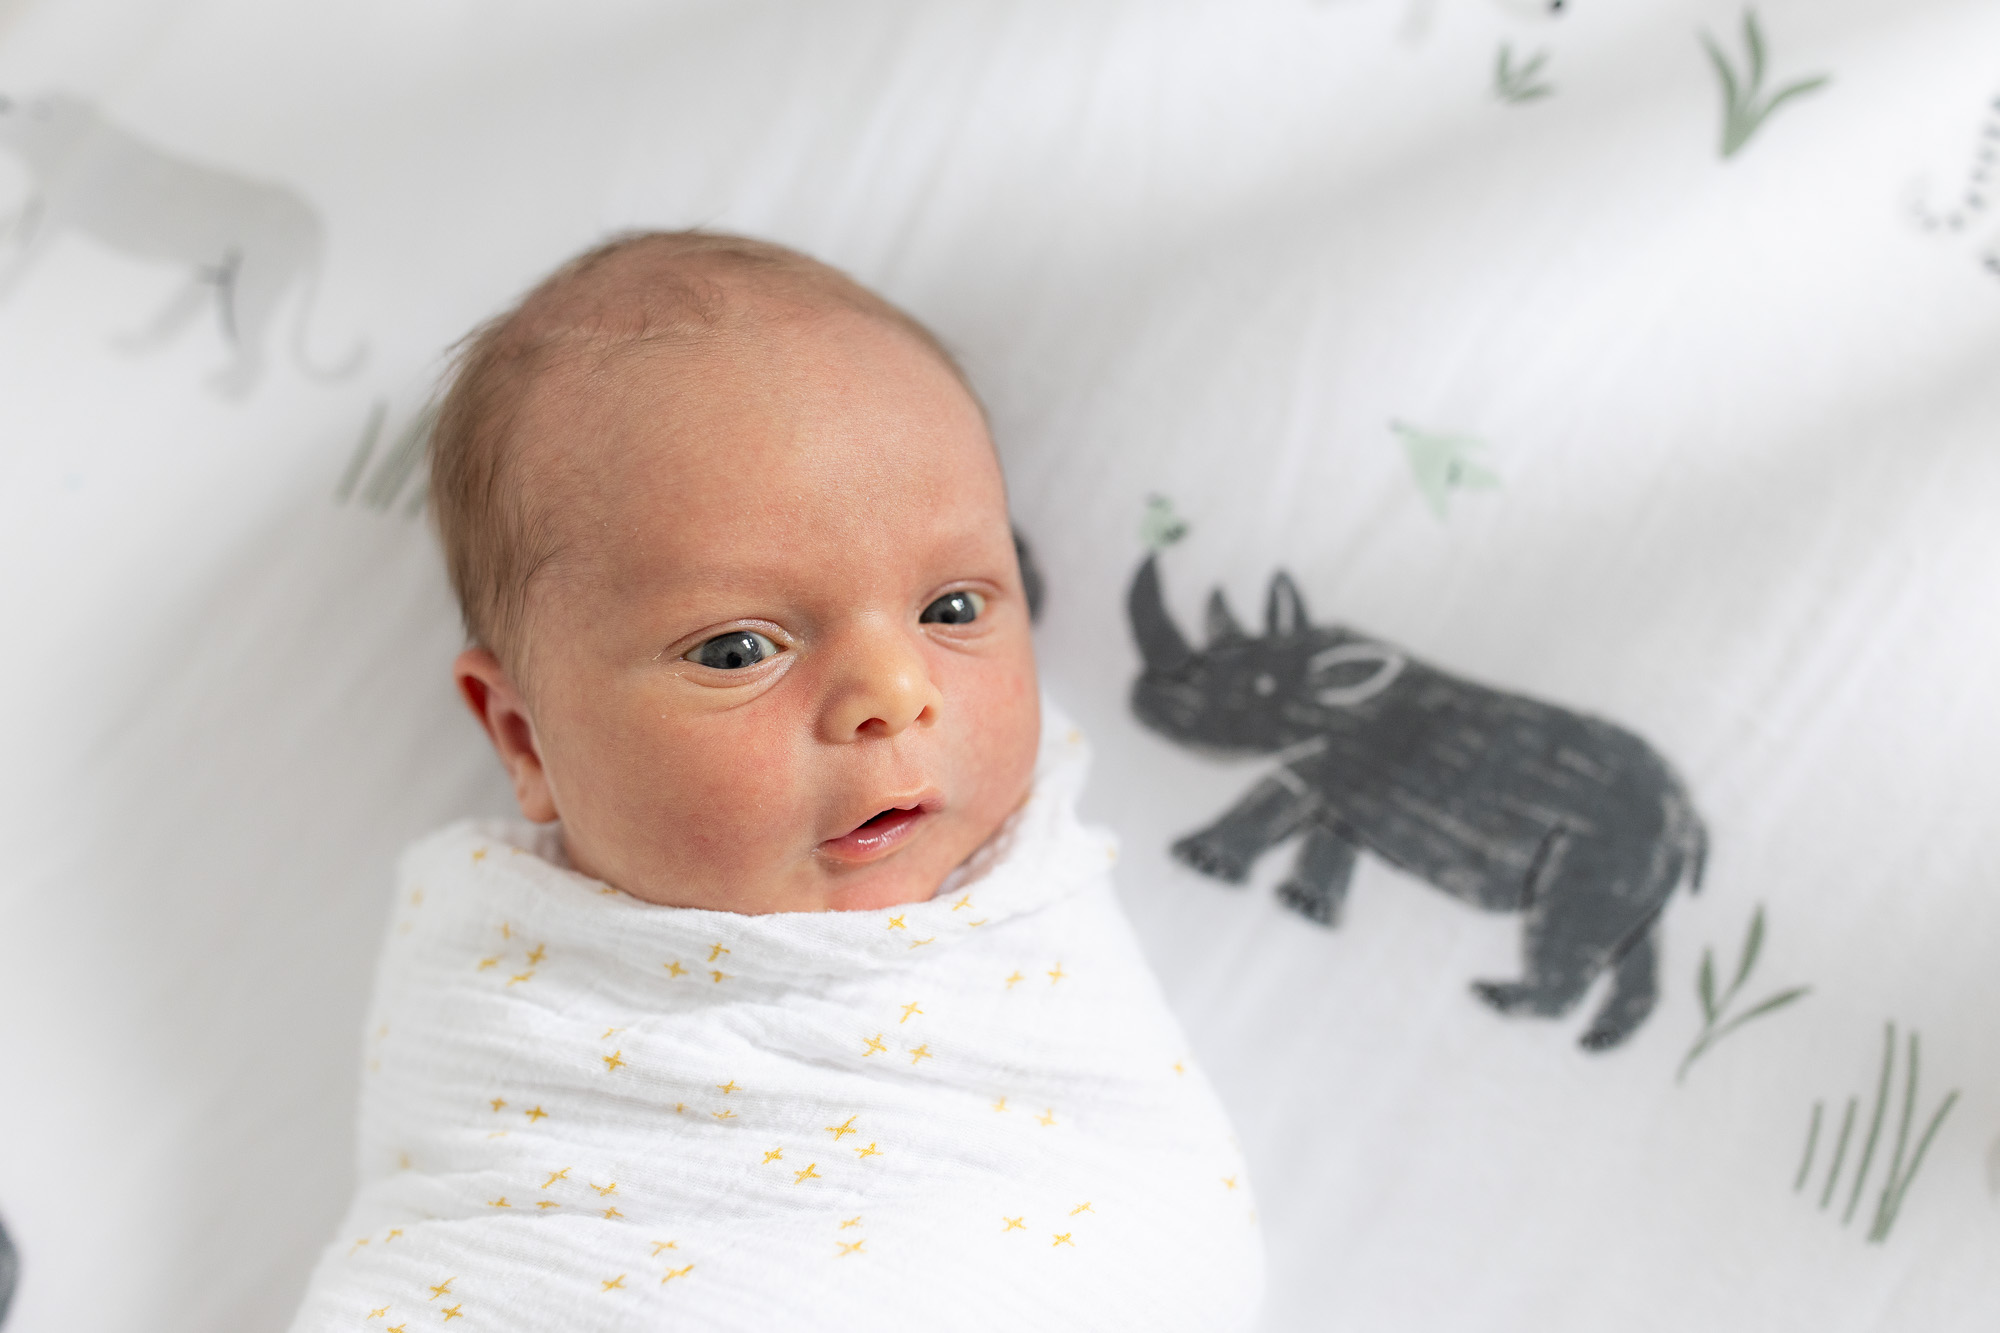 A newborn swaddled in his crib during a newborn photo shoot.